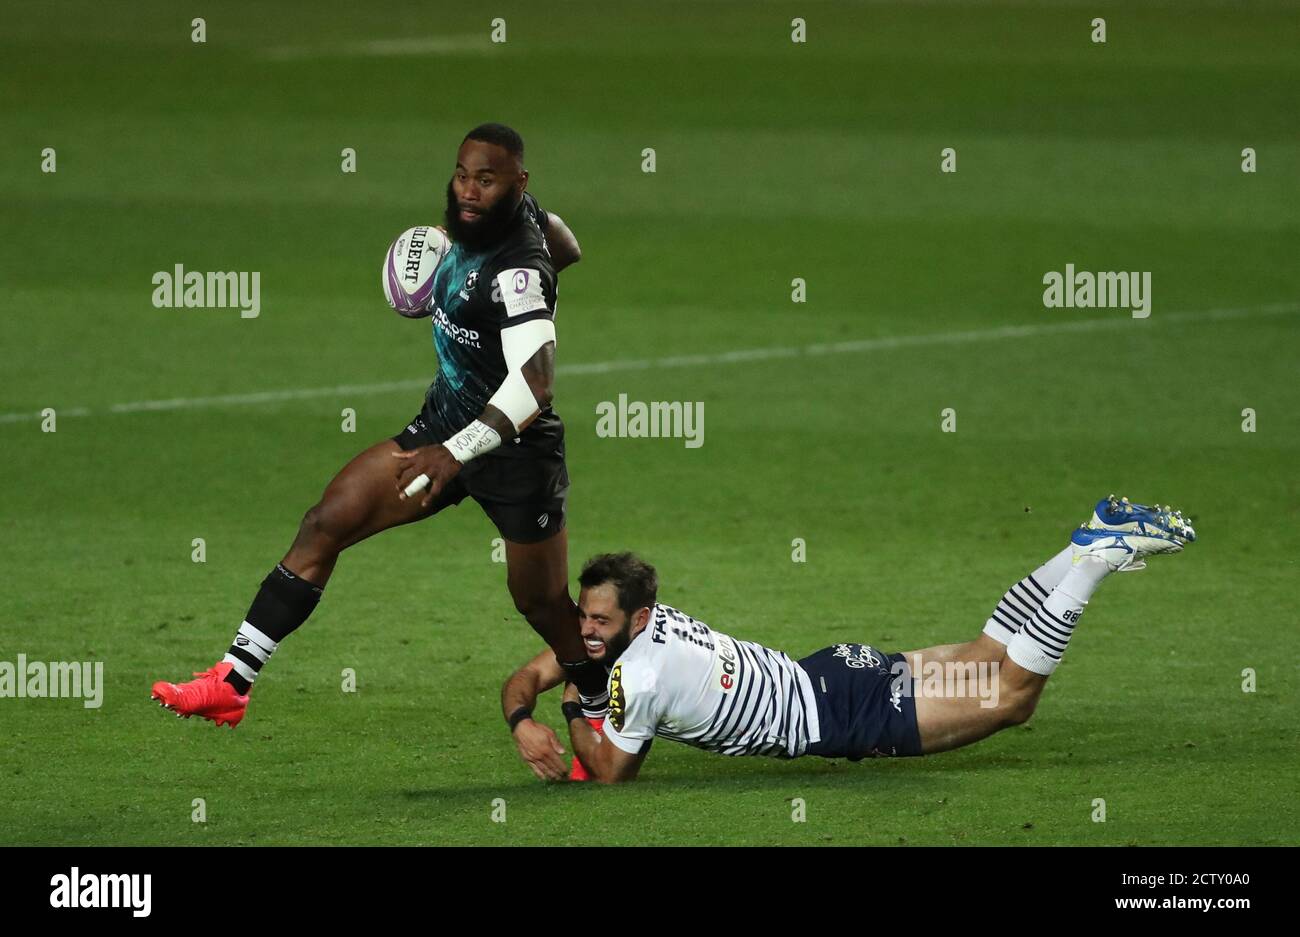 Bristol Bears Semi Radrada (left) tackled during the European Challenge Cup semi final match at Ashton Gate, Bristol. Picture date: Friday September 25, 2020. See PA story RUGBYU Bristol. Photo credit should read: David Davies/PA Wire. Stock Photo